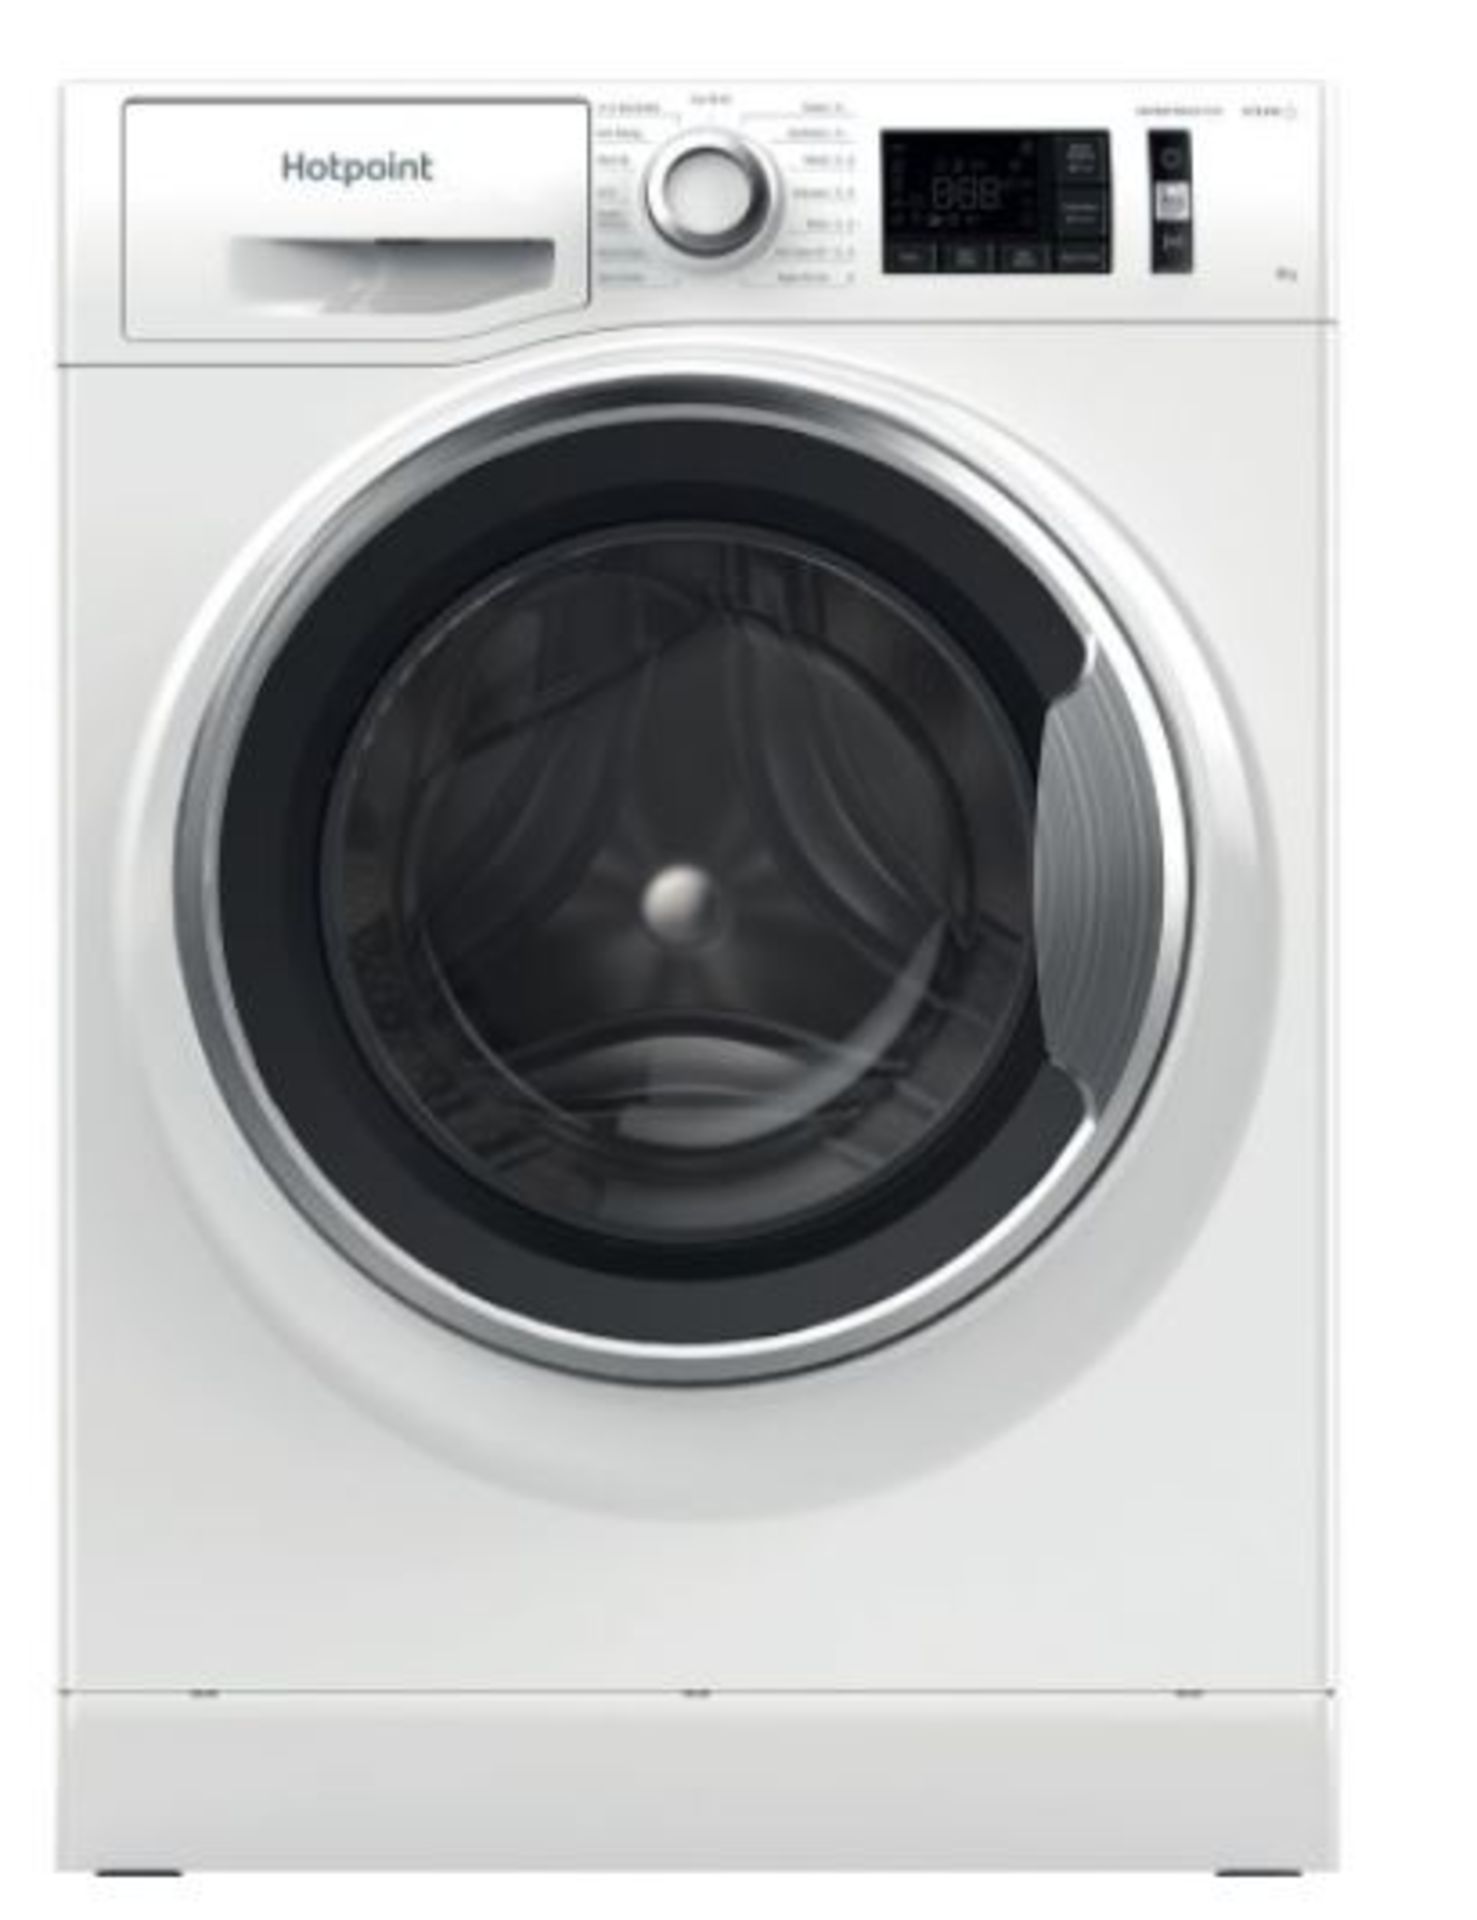 2 Pallets of Mixed Laundry Goods. Brands include HOTPOINT, BEKO. Latest selling price £2,493